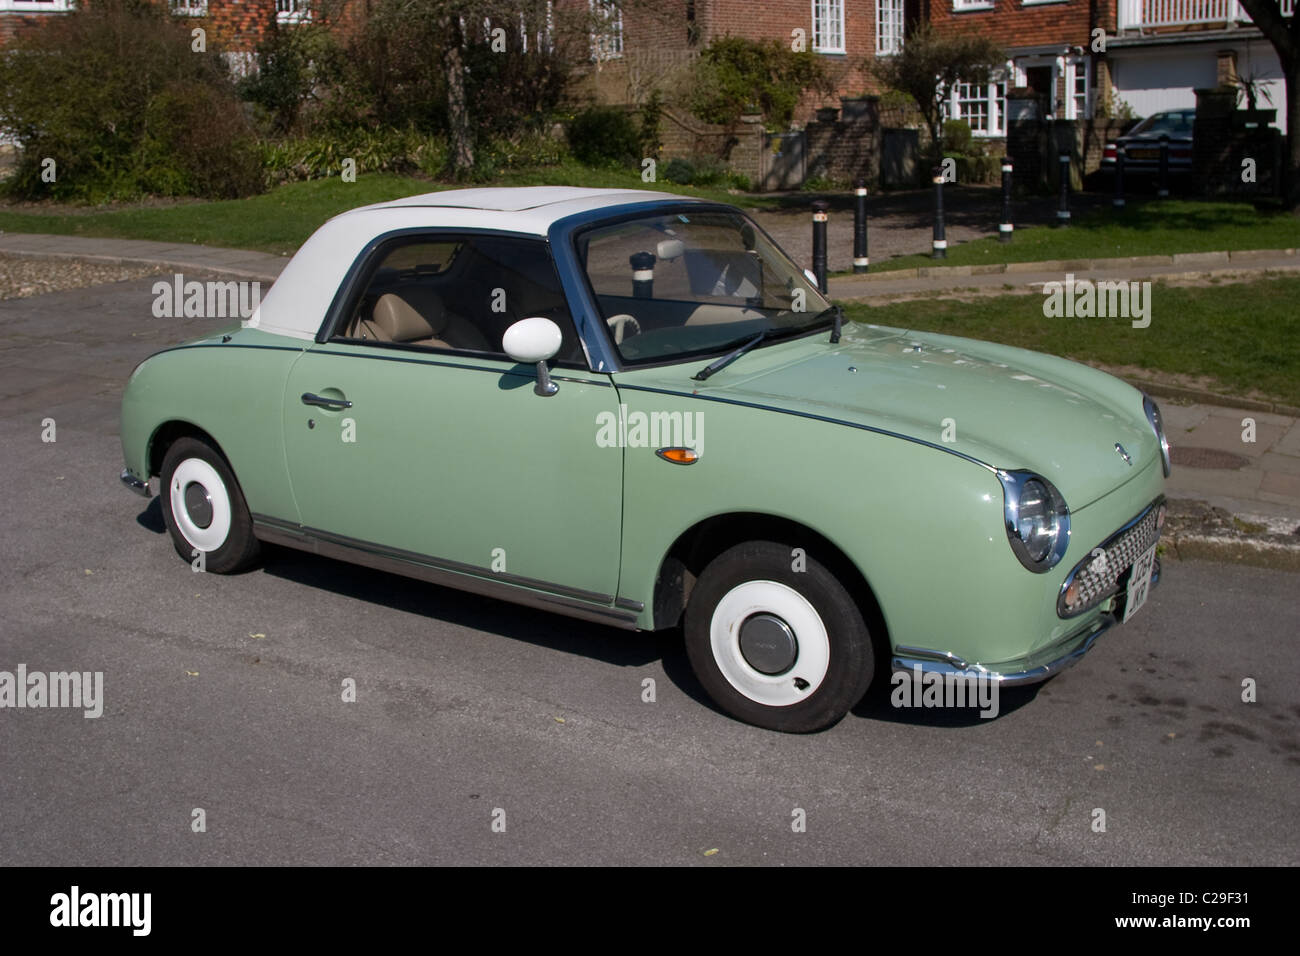 1960's Nissan Figaro classic coupe sports car Stock Photo - Alamy